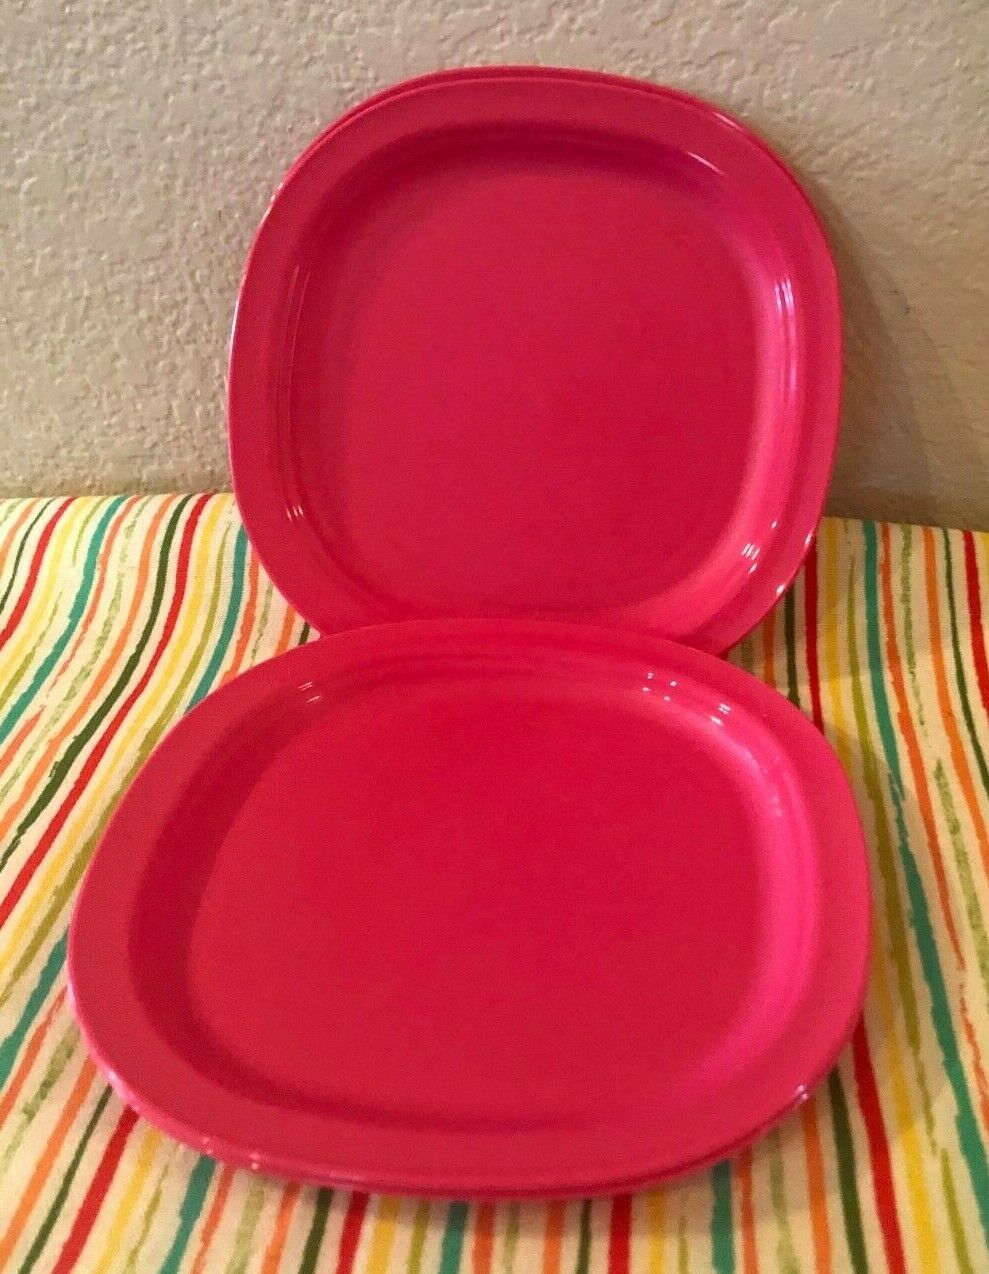 Tupperware Microwave Reheatable Luncheon Plates 7 3/4” Pink Punch Set of 4 New